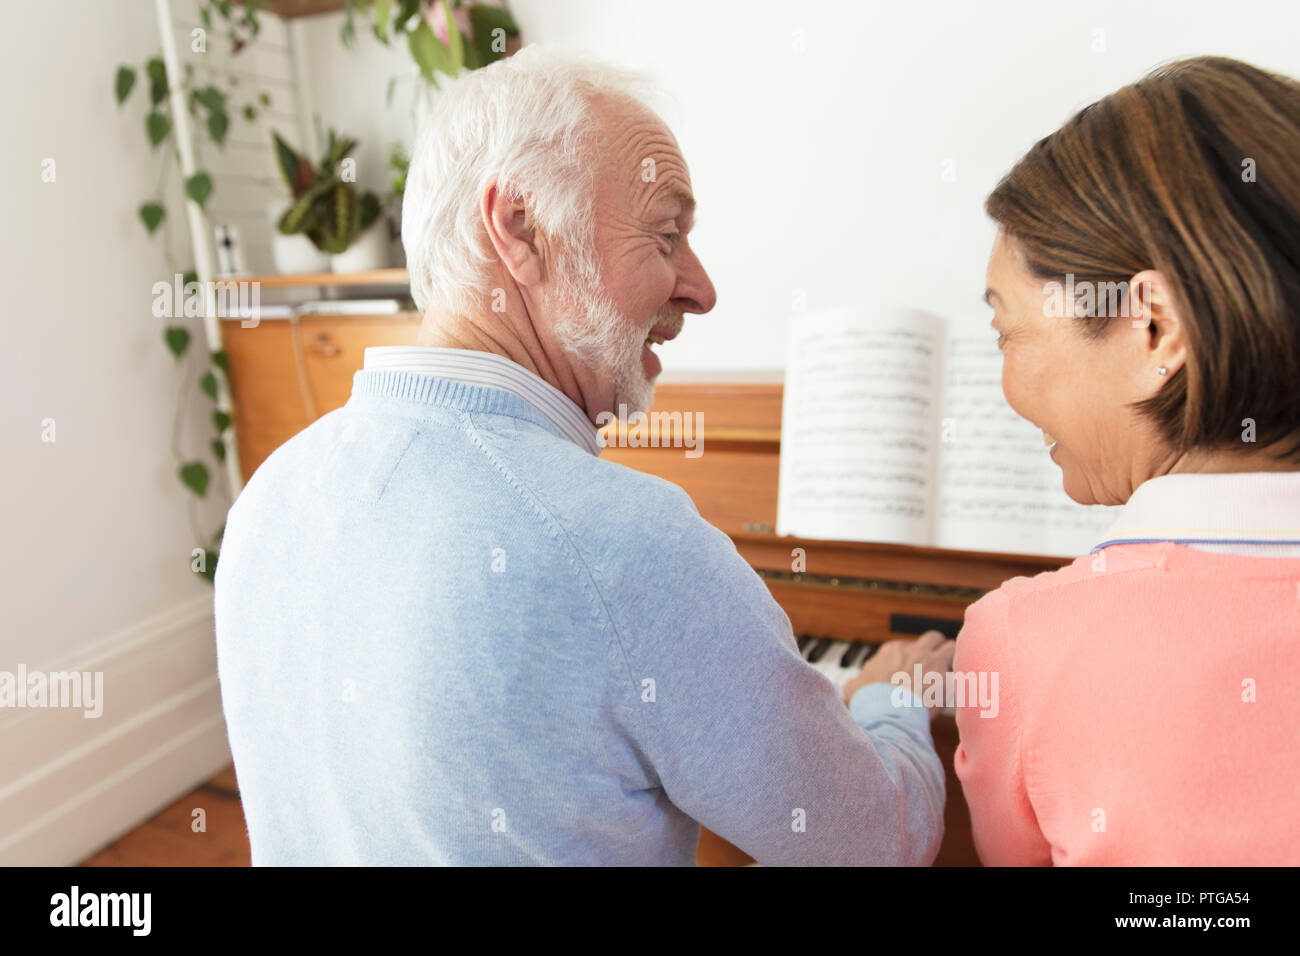 Senior couple playing piano Banque D'Images